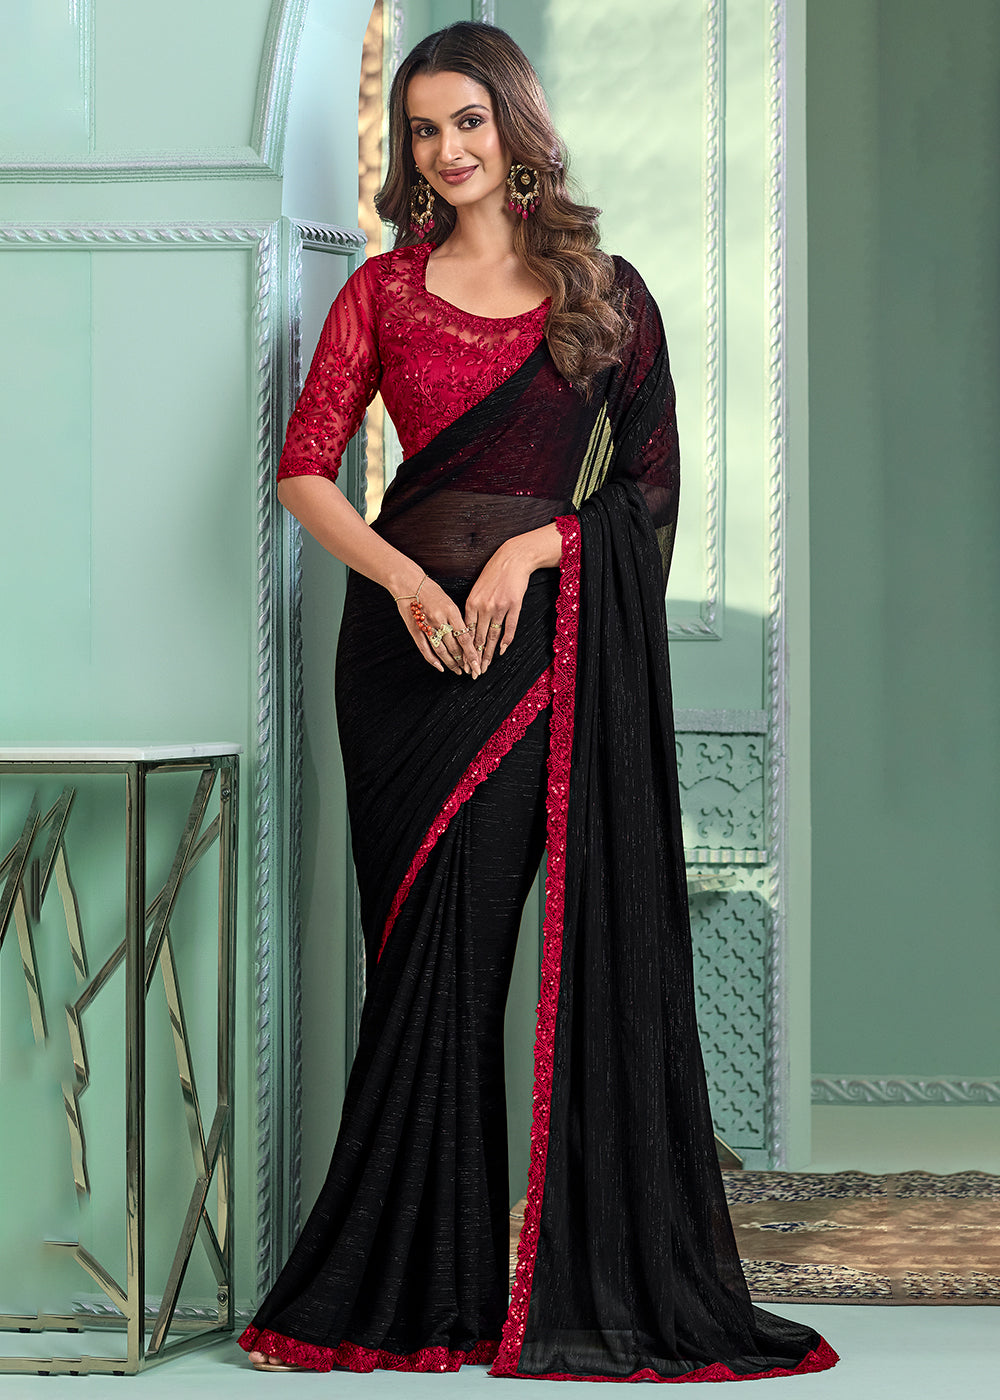 Buy Now Lovely Black Chiffon Embroidered Wedding Party Wear Saree Online in USA, UK, Canada & Worldwide at Empress Clothing.